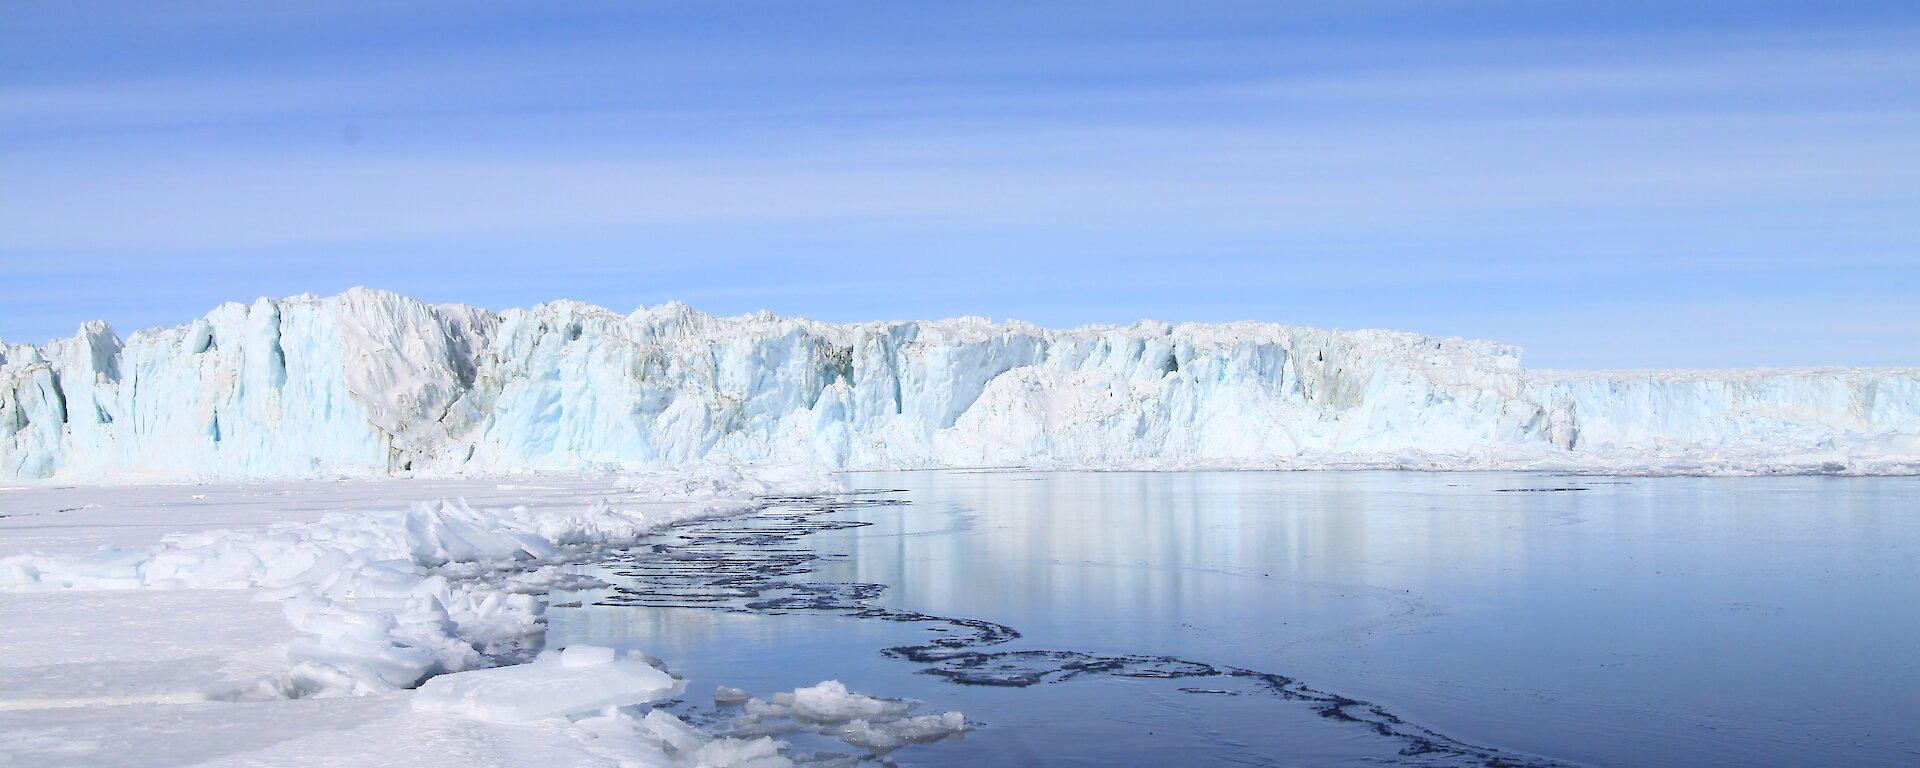 Ice cliffs surrounding the water